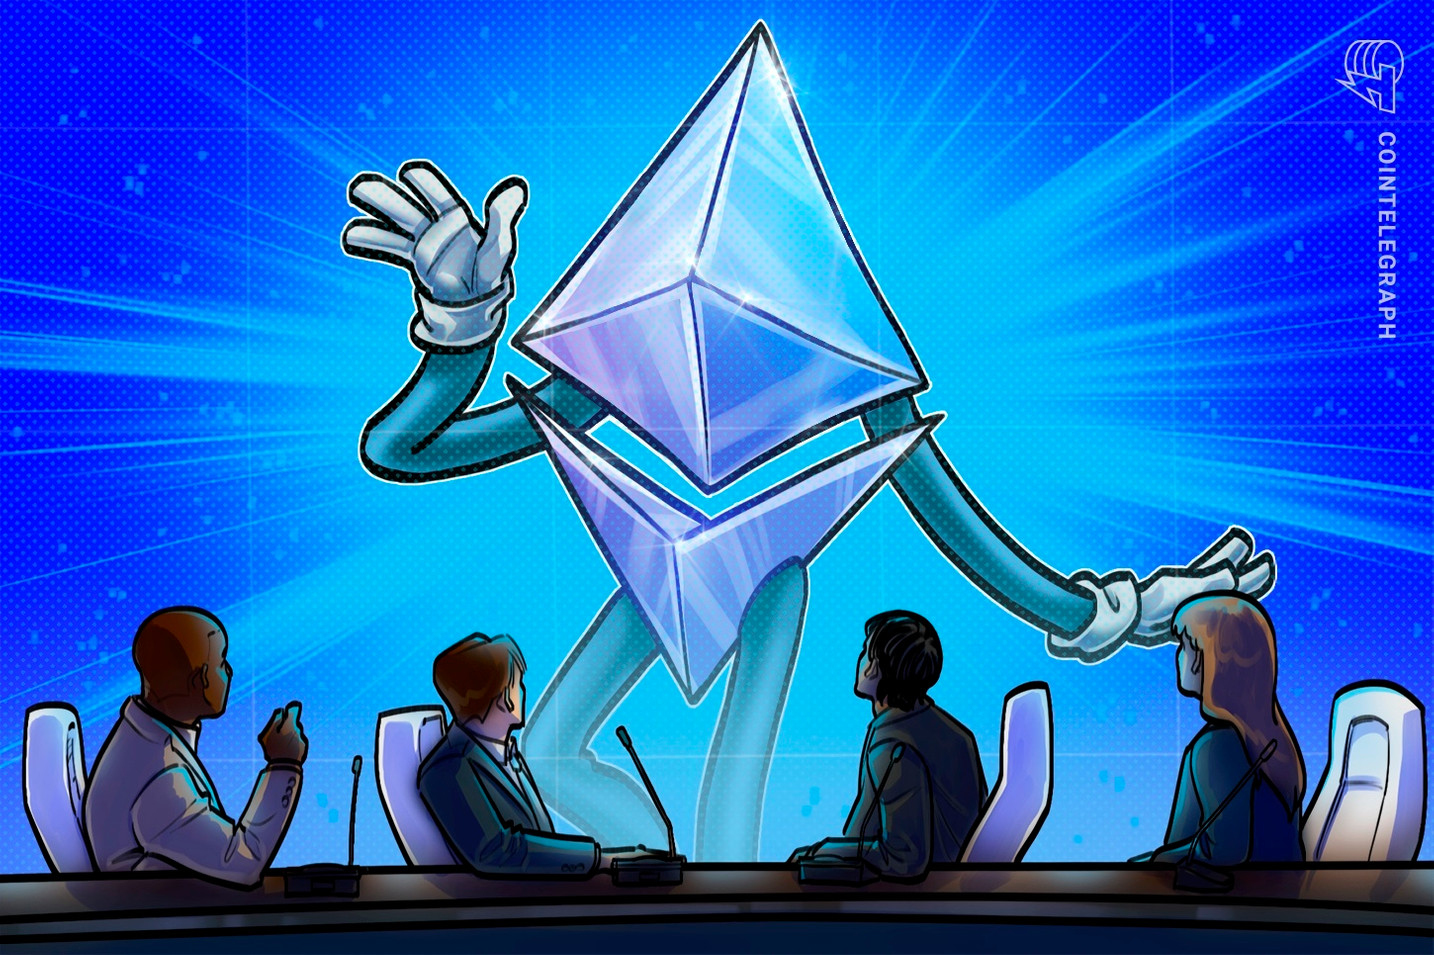 3 reasons why Ethereum’s market cap dominance is on the rise